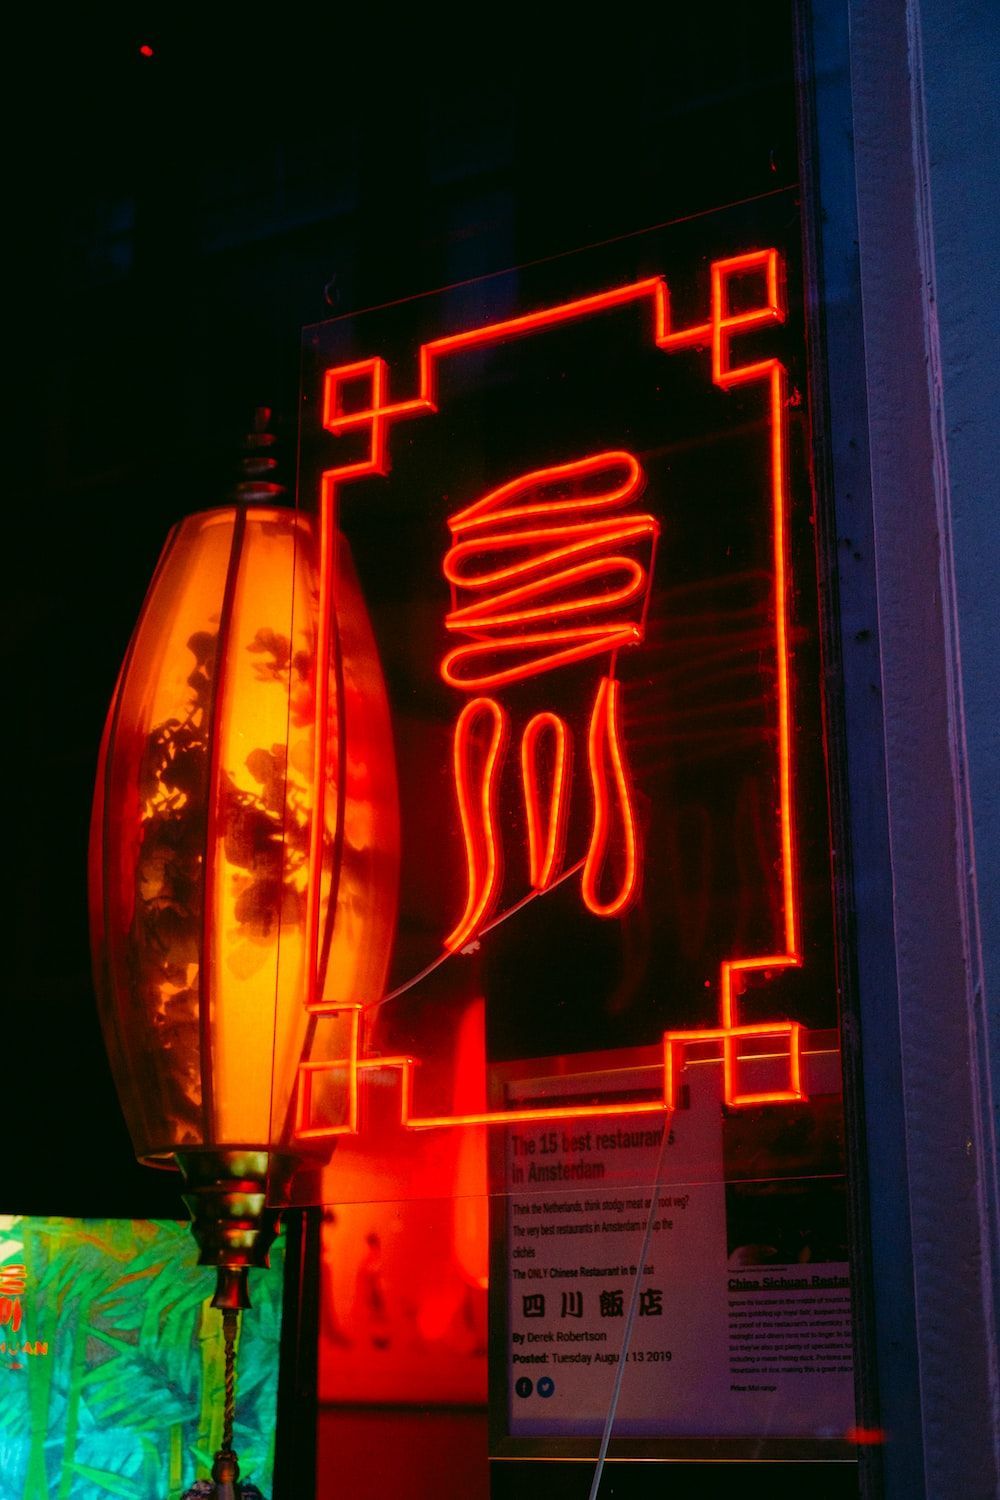 A neon sign for a restaurant in chinatown - Neon orange